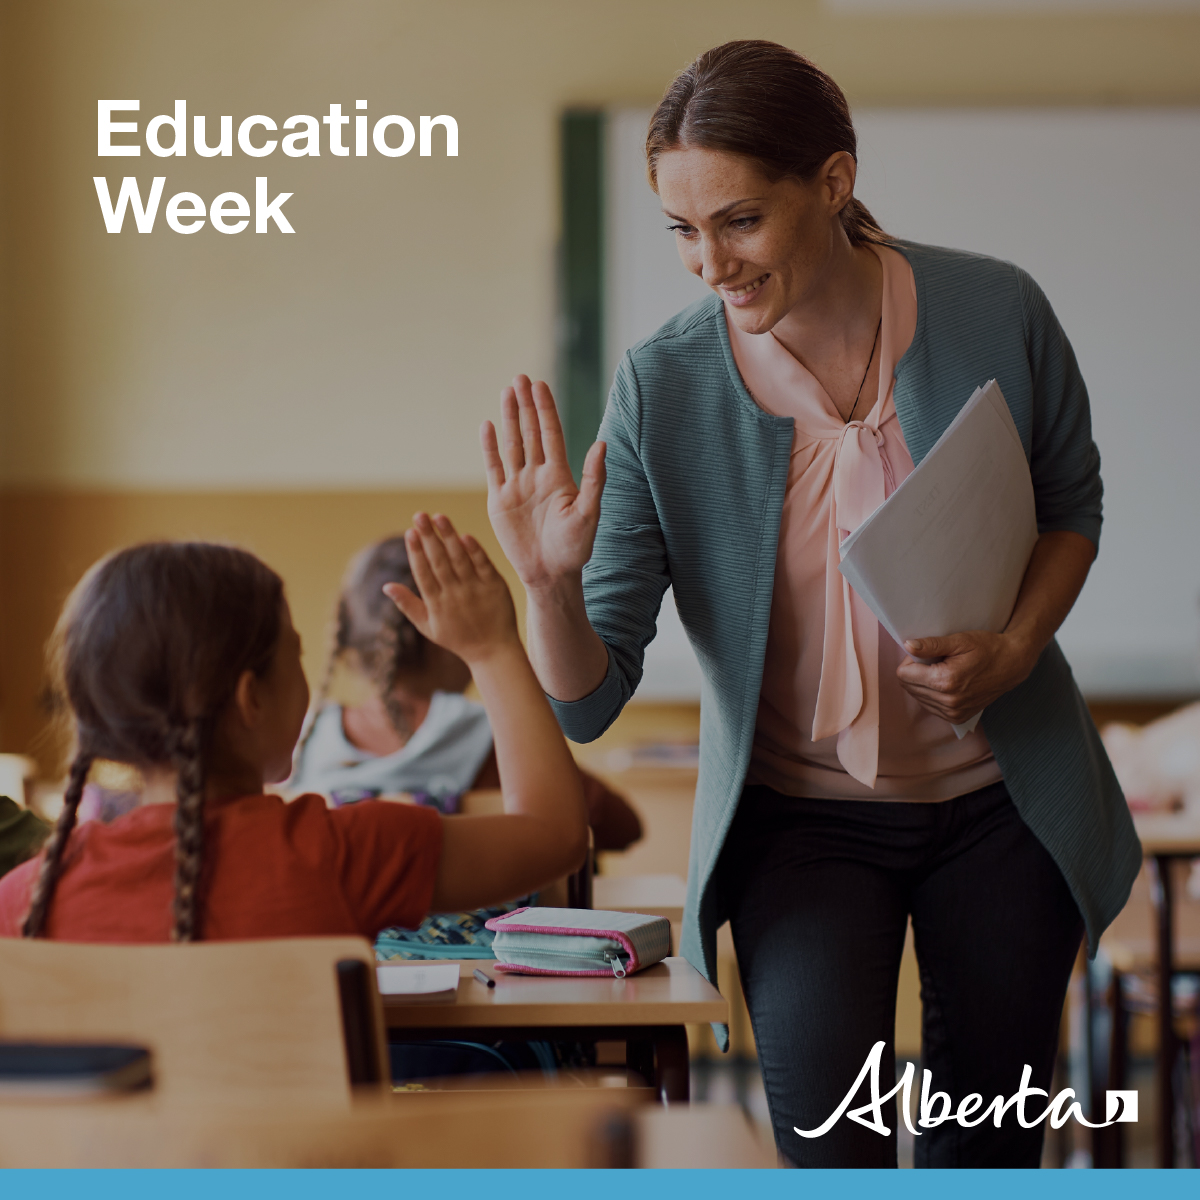 Happy #EducationWeek to the many education partners uplifting #abed students and setting them on a lifelong path of curiosity, learning and success.